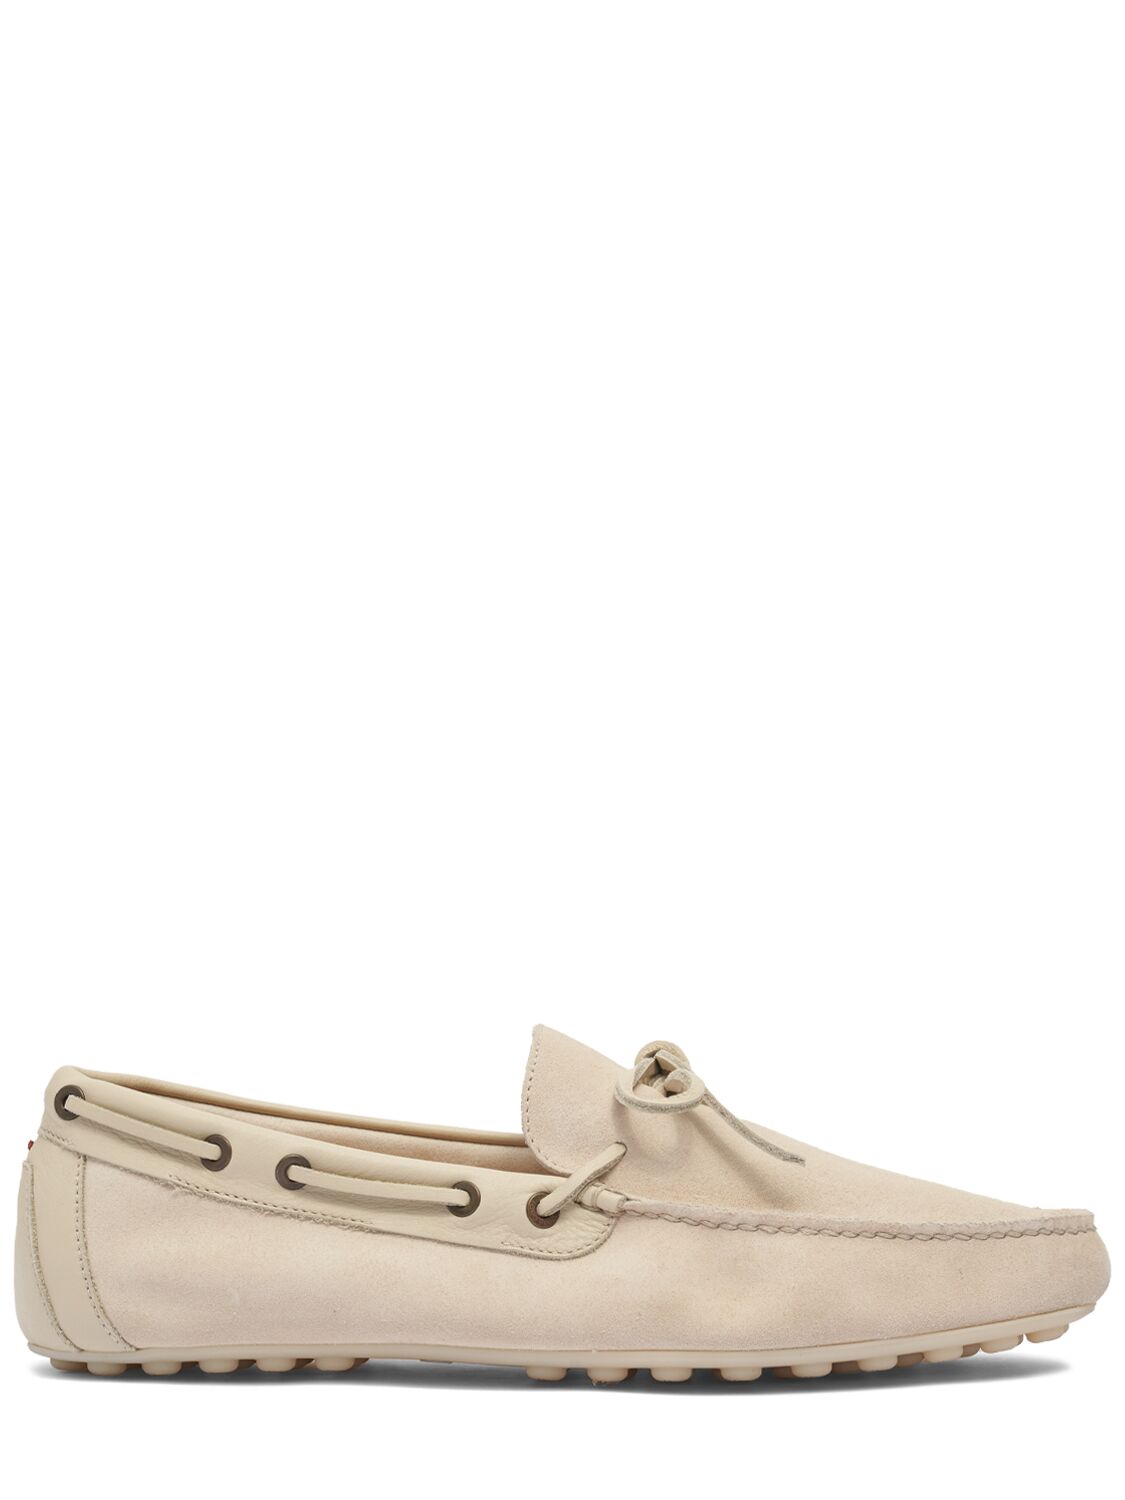 Image of Lp Dots Roadster Suede Loafers